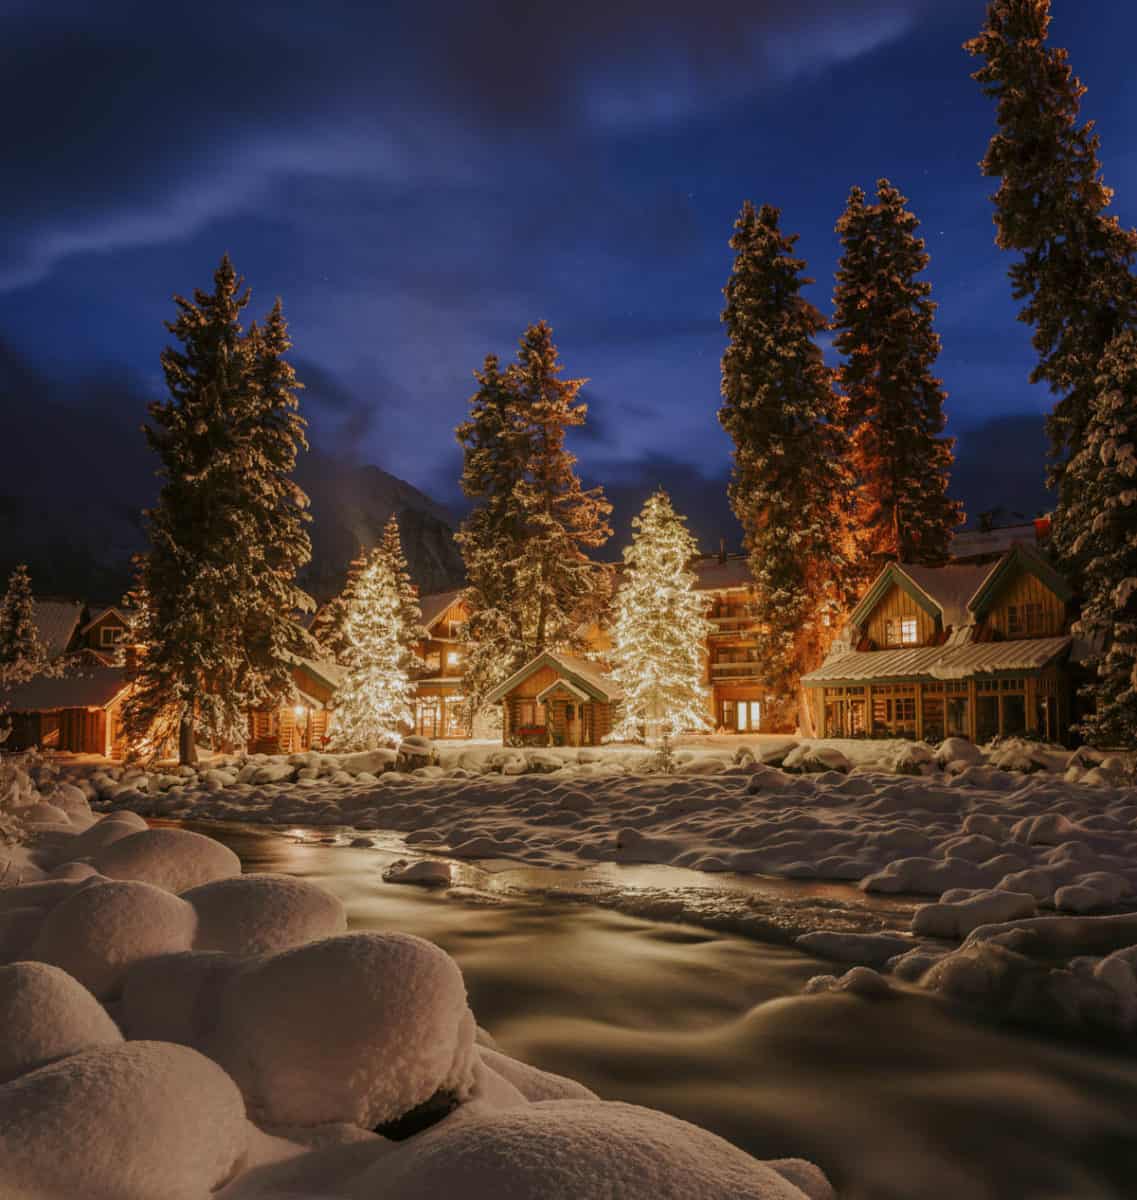 Christmas in Banff National Park